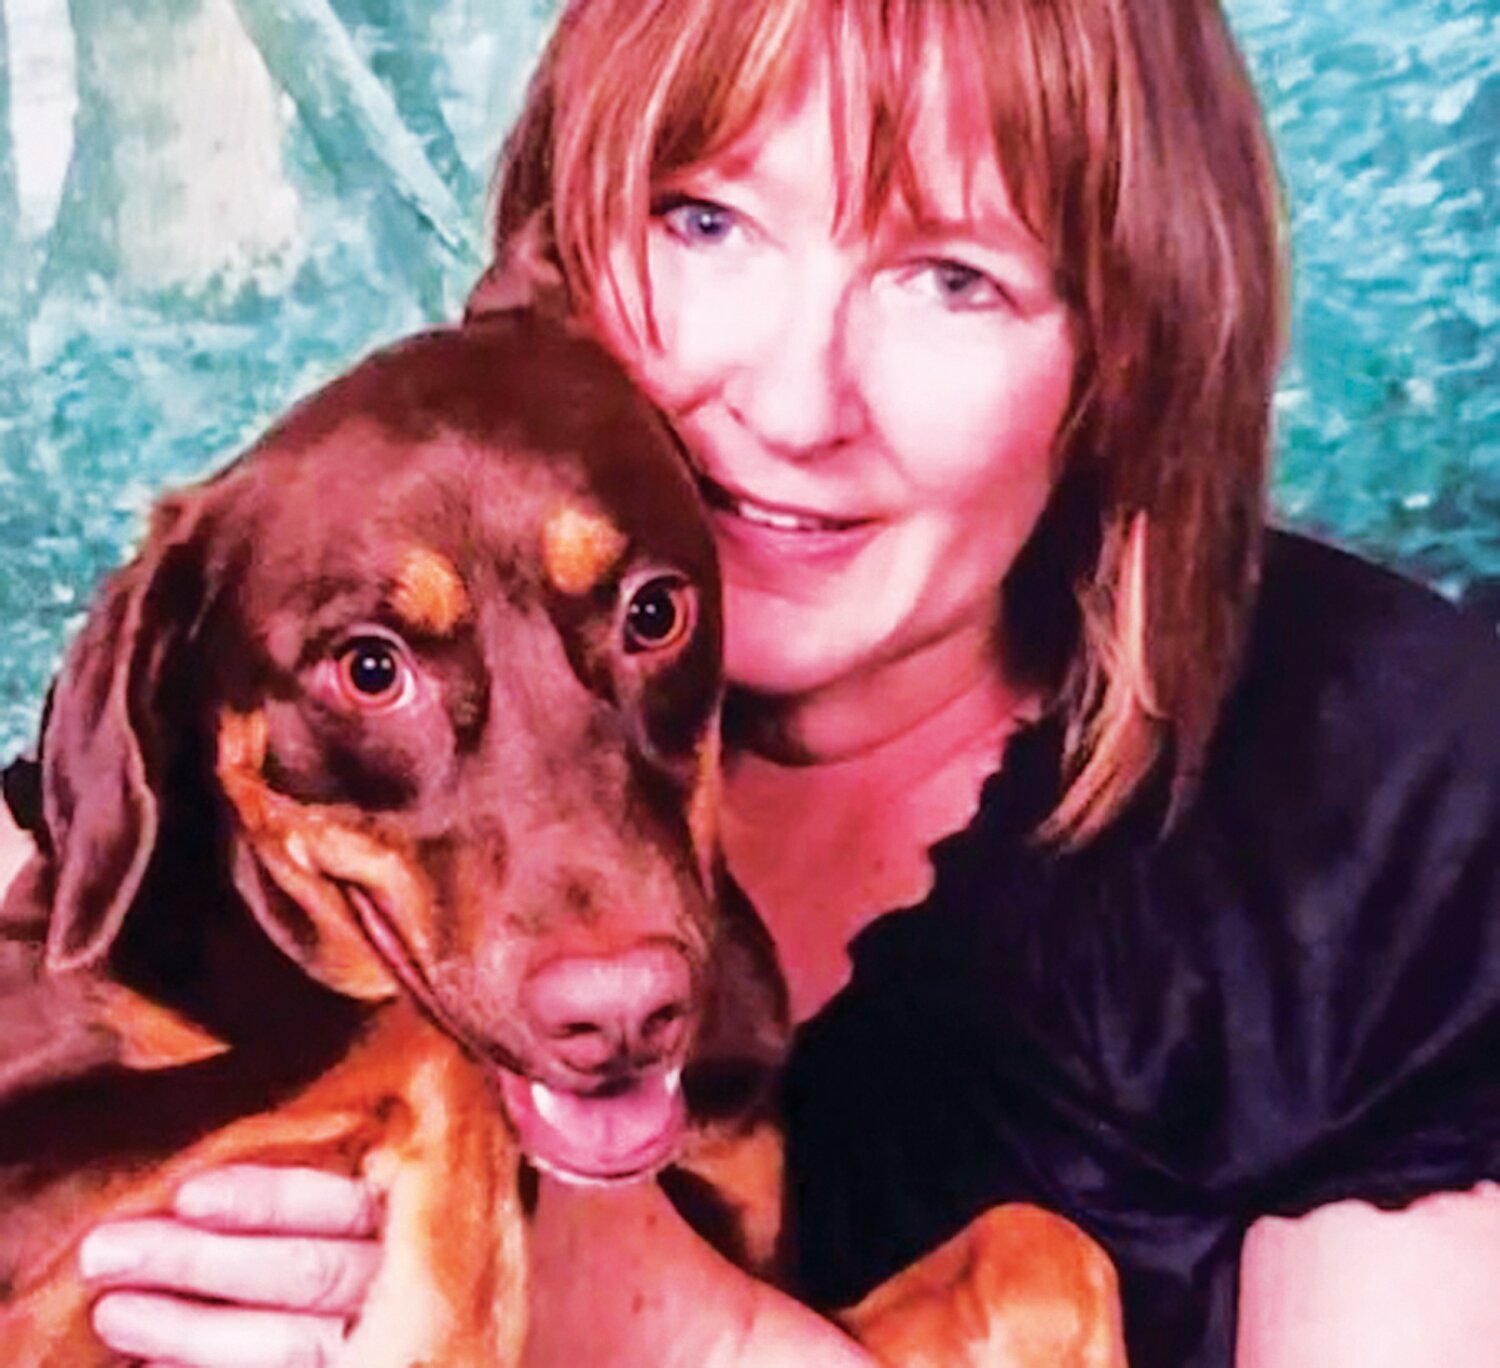 Susan Barnhart, 53, of Titusville N.J., died in the flash flood that hit Upper Makefield on July 15. She was well known to members of the community as she formerly worked at the Washington Crossing Post Office. Her dog survived the flood.